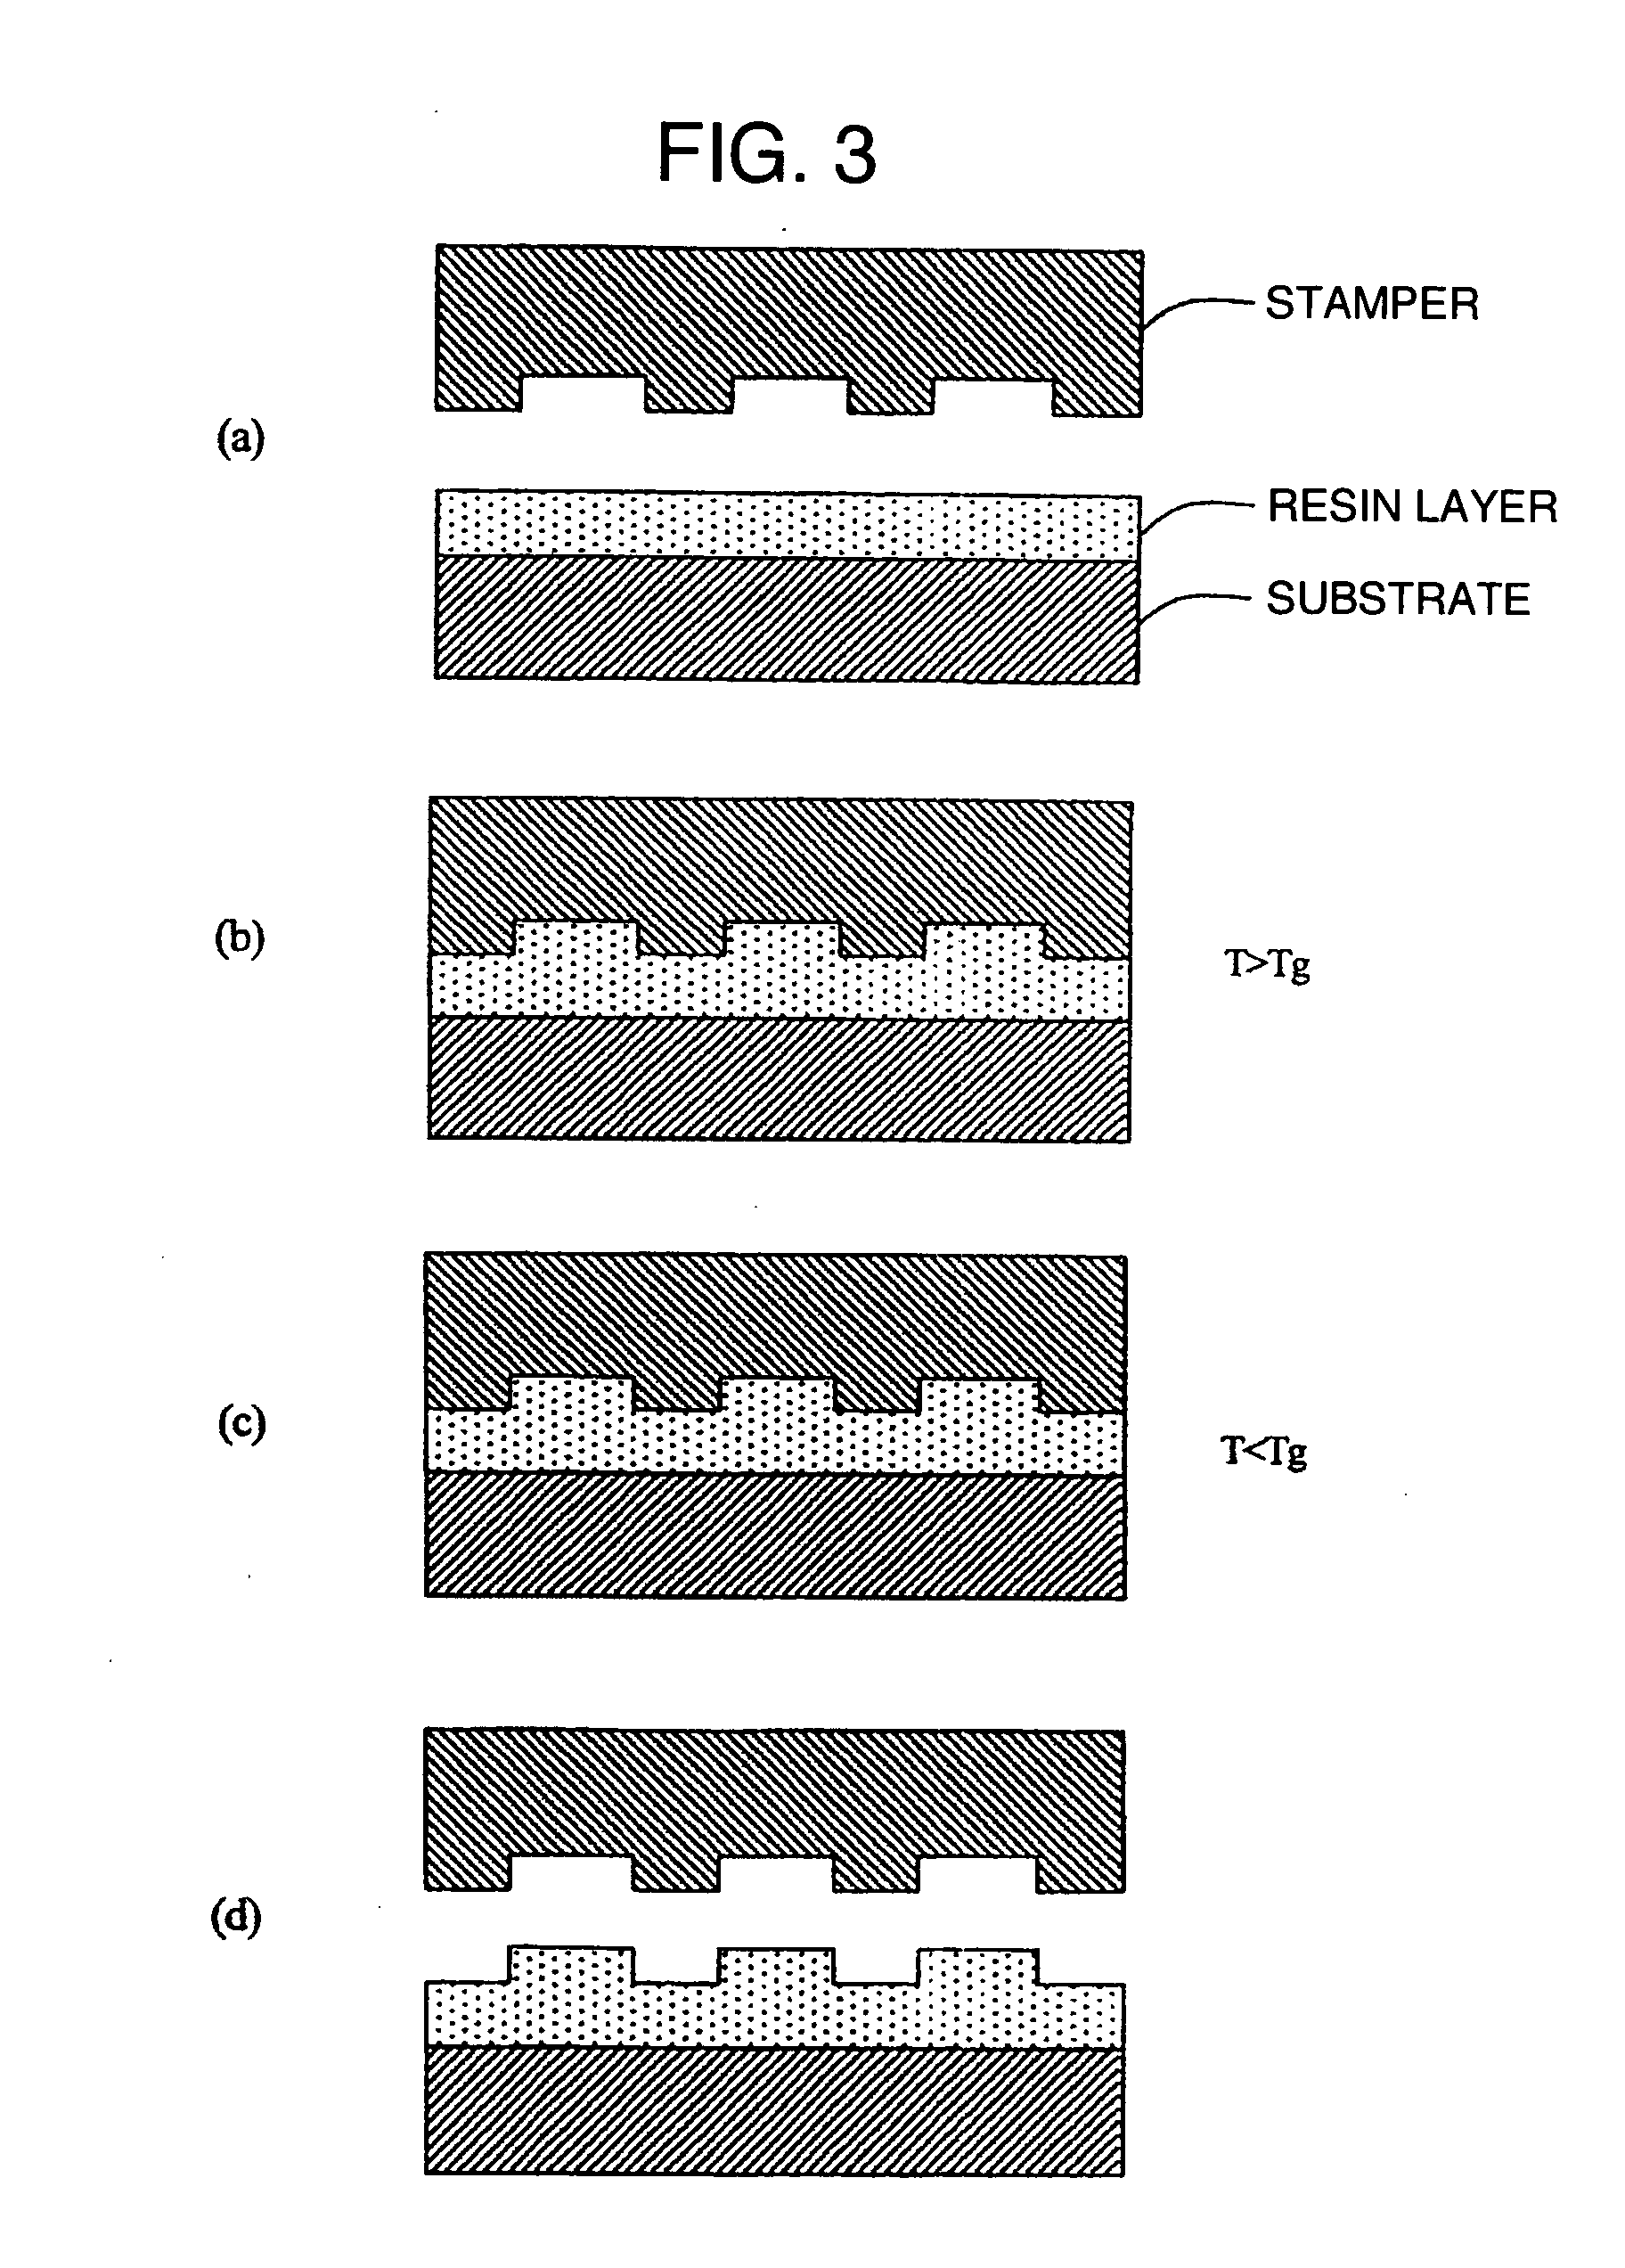 Methods of fabricating nano-scale and micro-scale mold for nano-imprint, and mold usage on nano-imprinting equipment